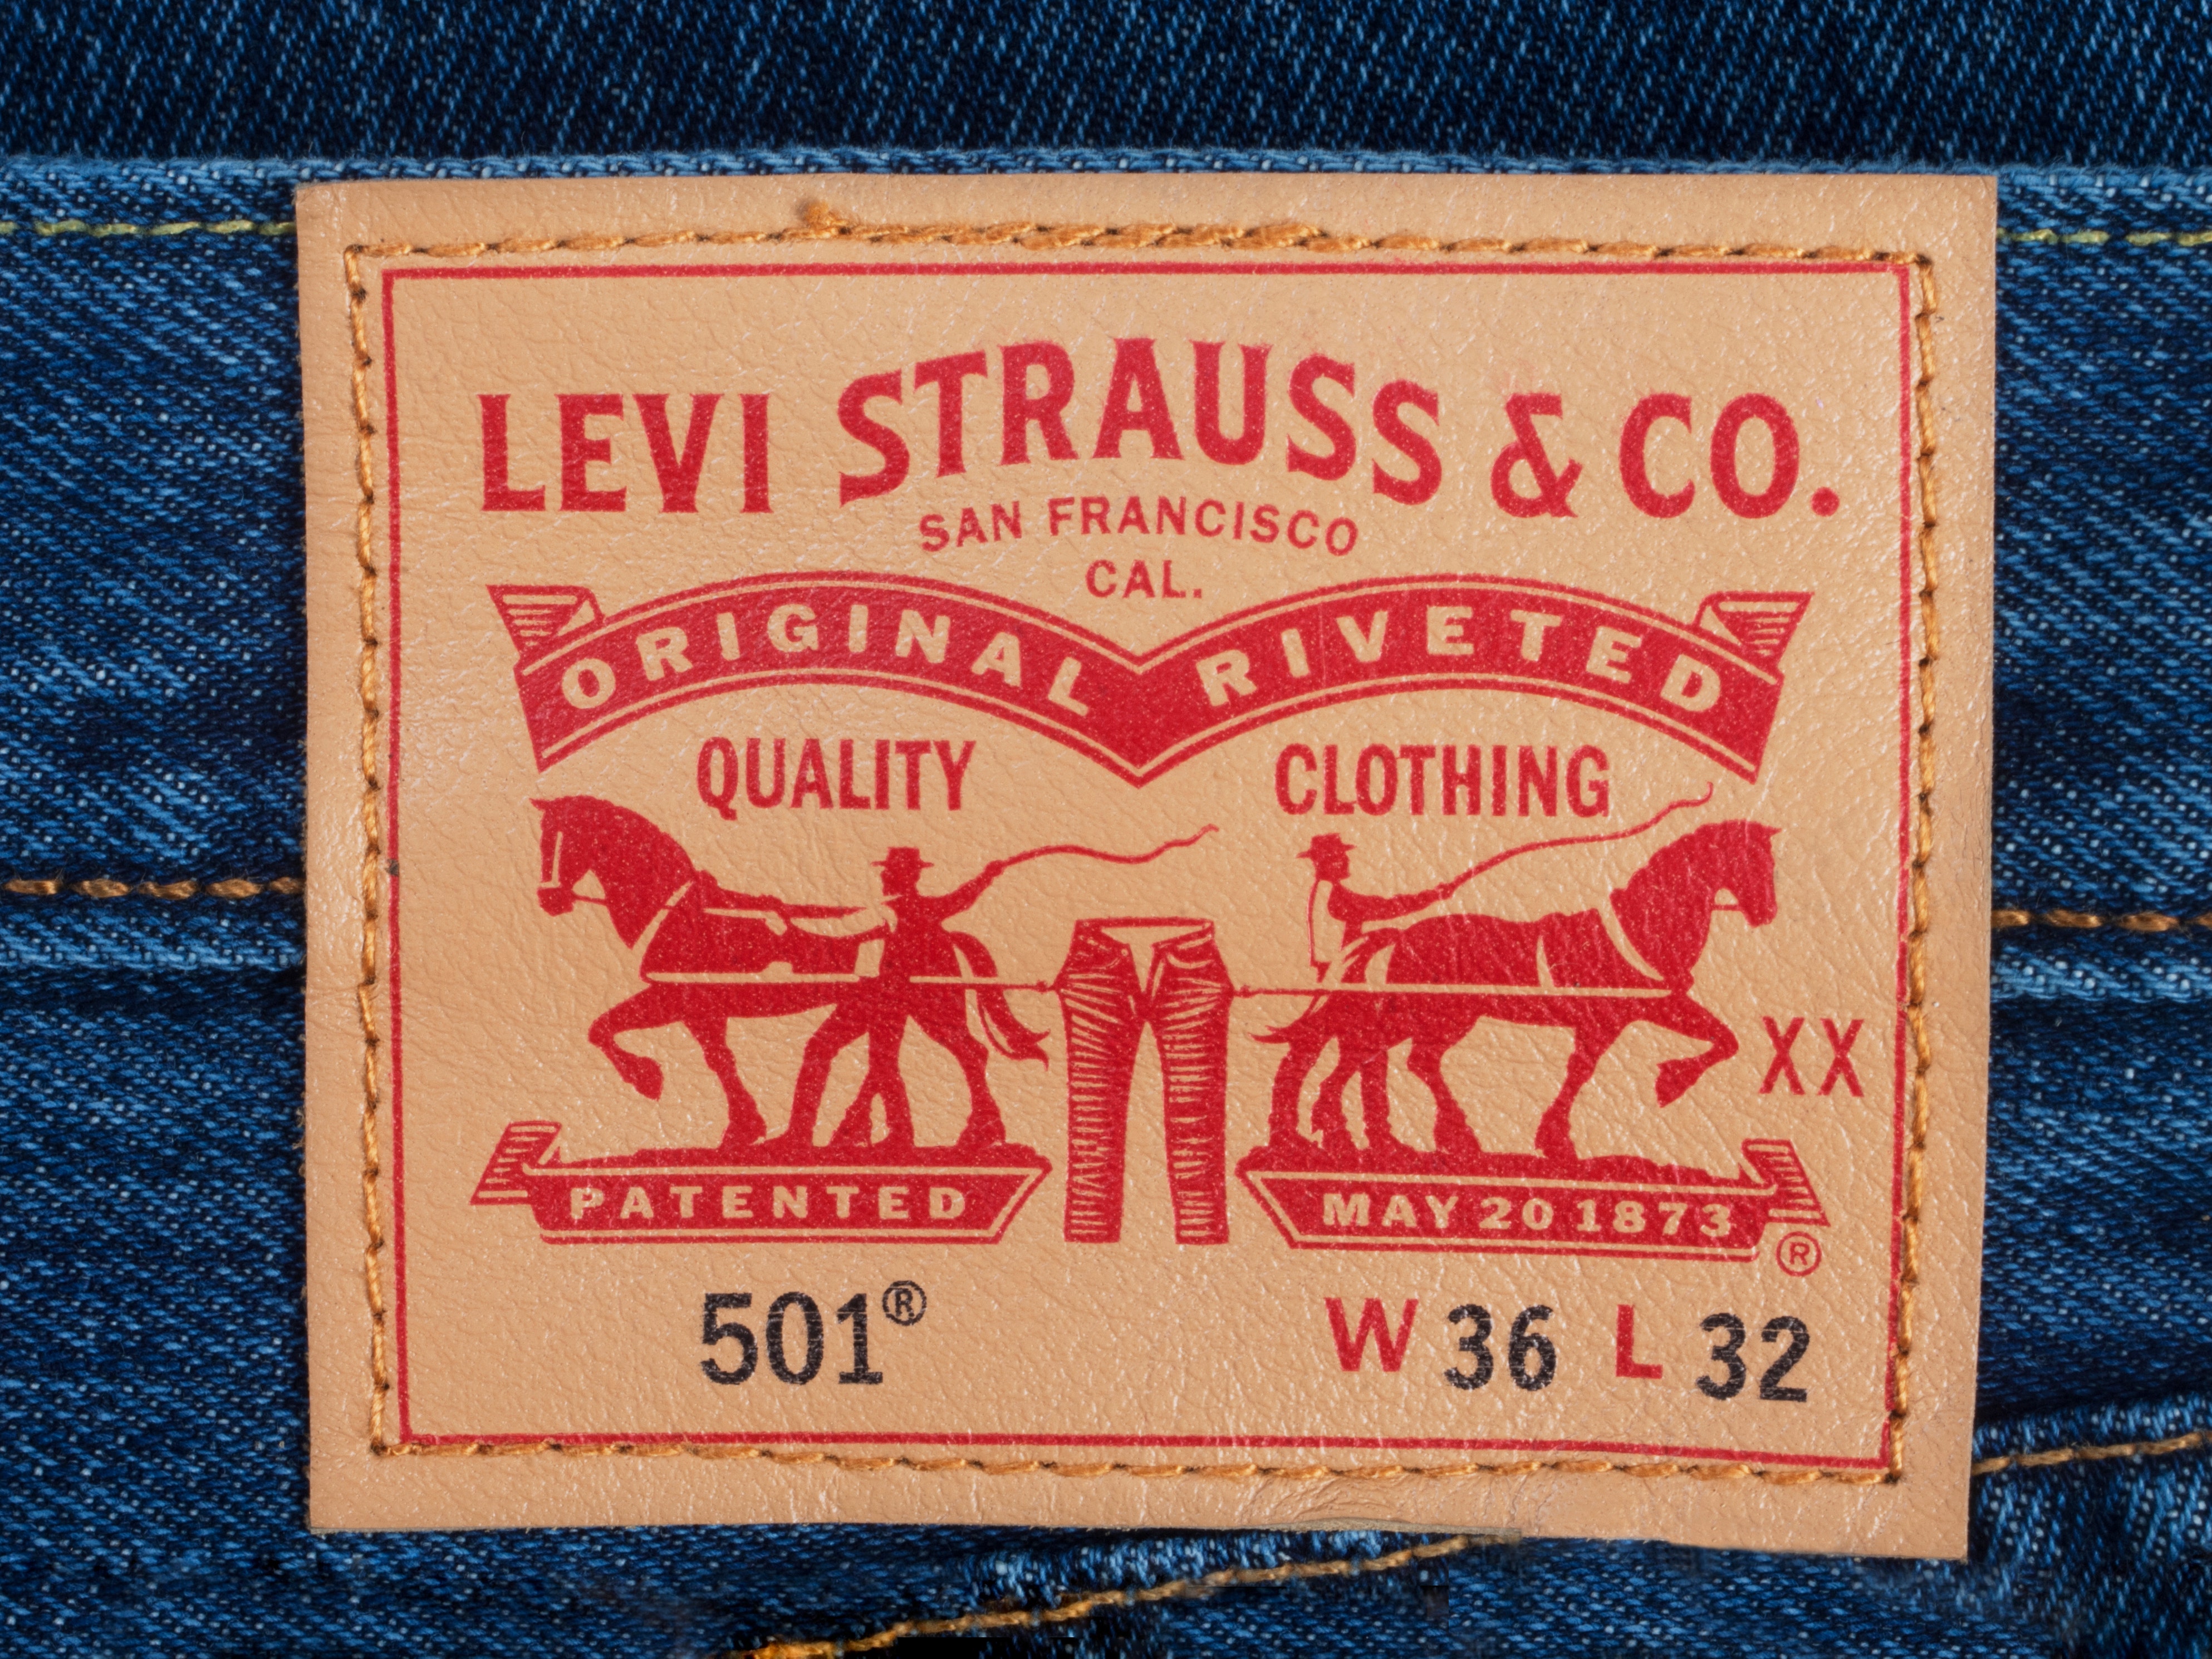 Levi Strauss Stock: A Great Buy While The Market Isn't Looking (NYSE:LEVI)